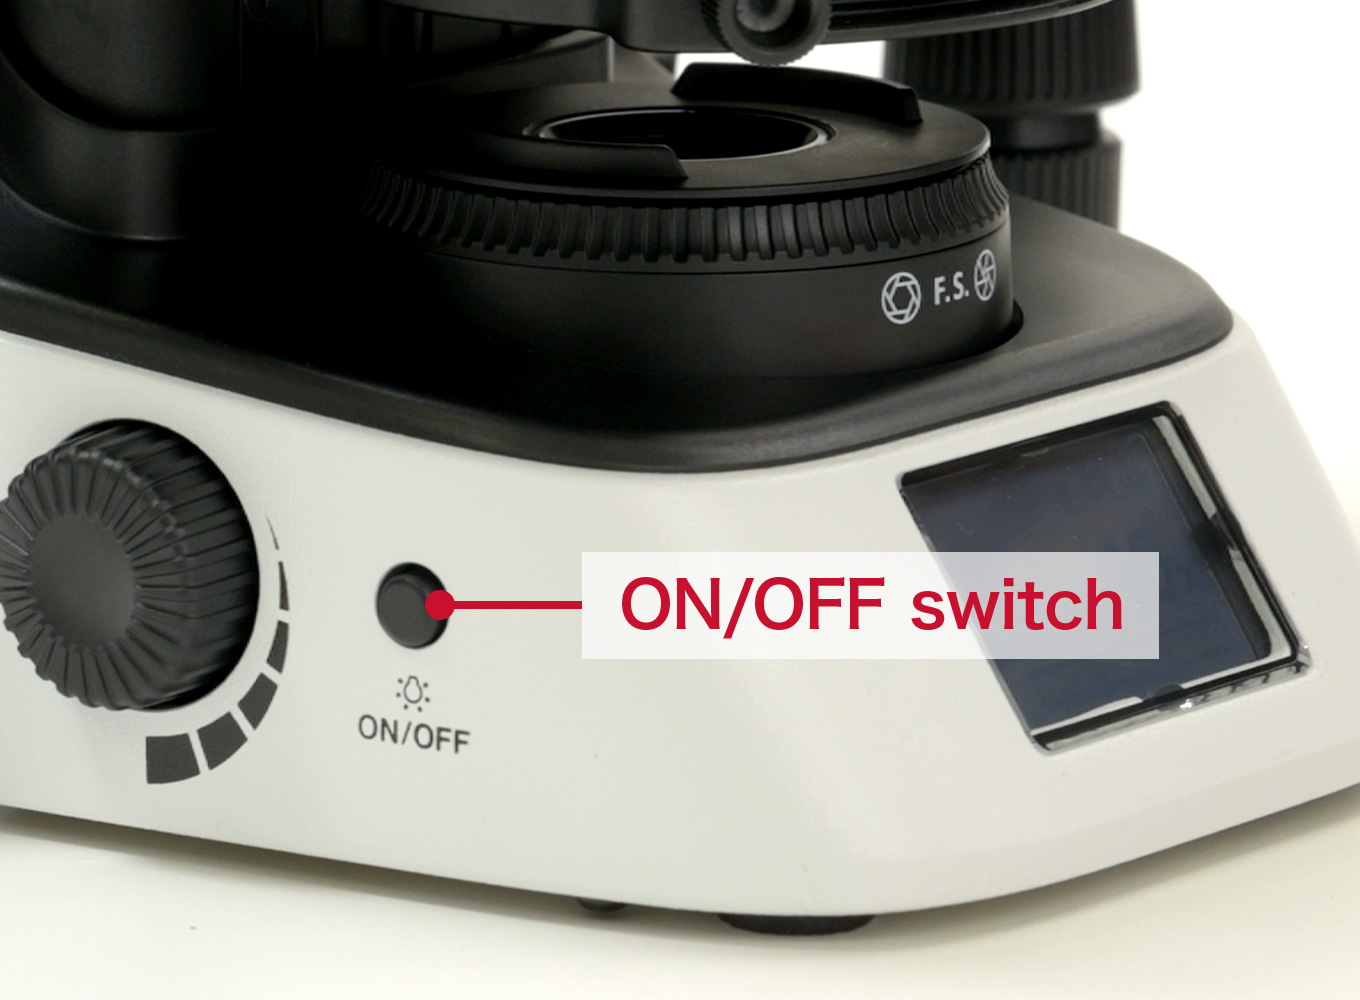 ON/OFF switch